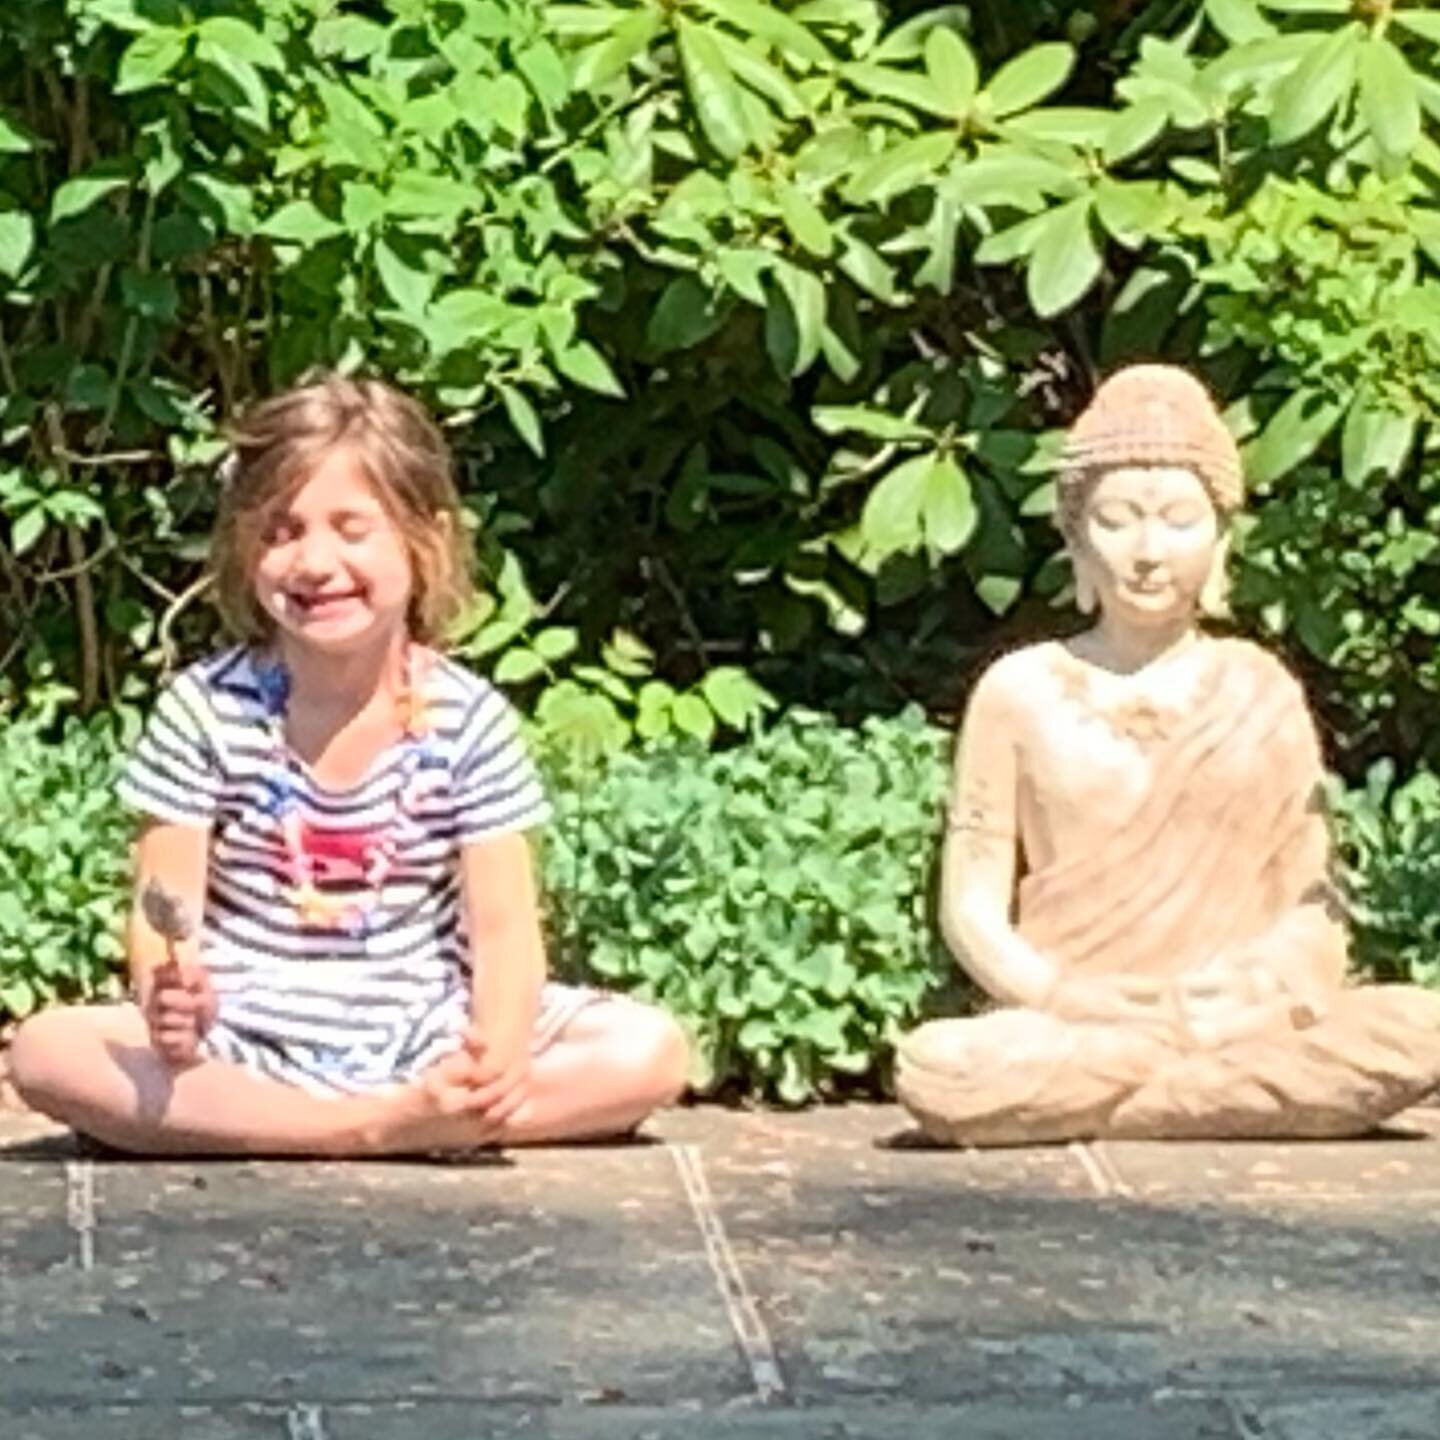 The least zen person I know;) Notice the smile is due to the popsicle in her hand... 
appreciating this brief moment of calm🧘&zwj;♀️🧘&zwj;♀️

#consciousparenting #meditate #breathe #presentmoment #love #children